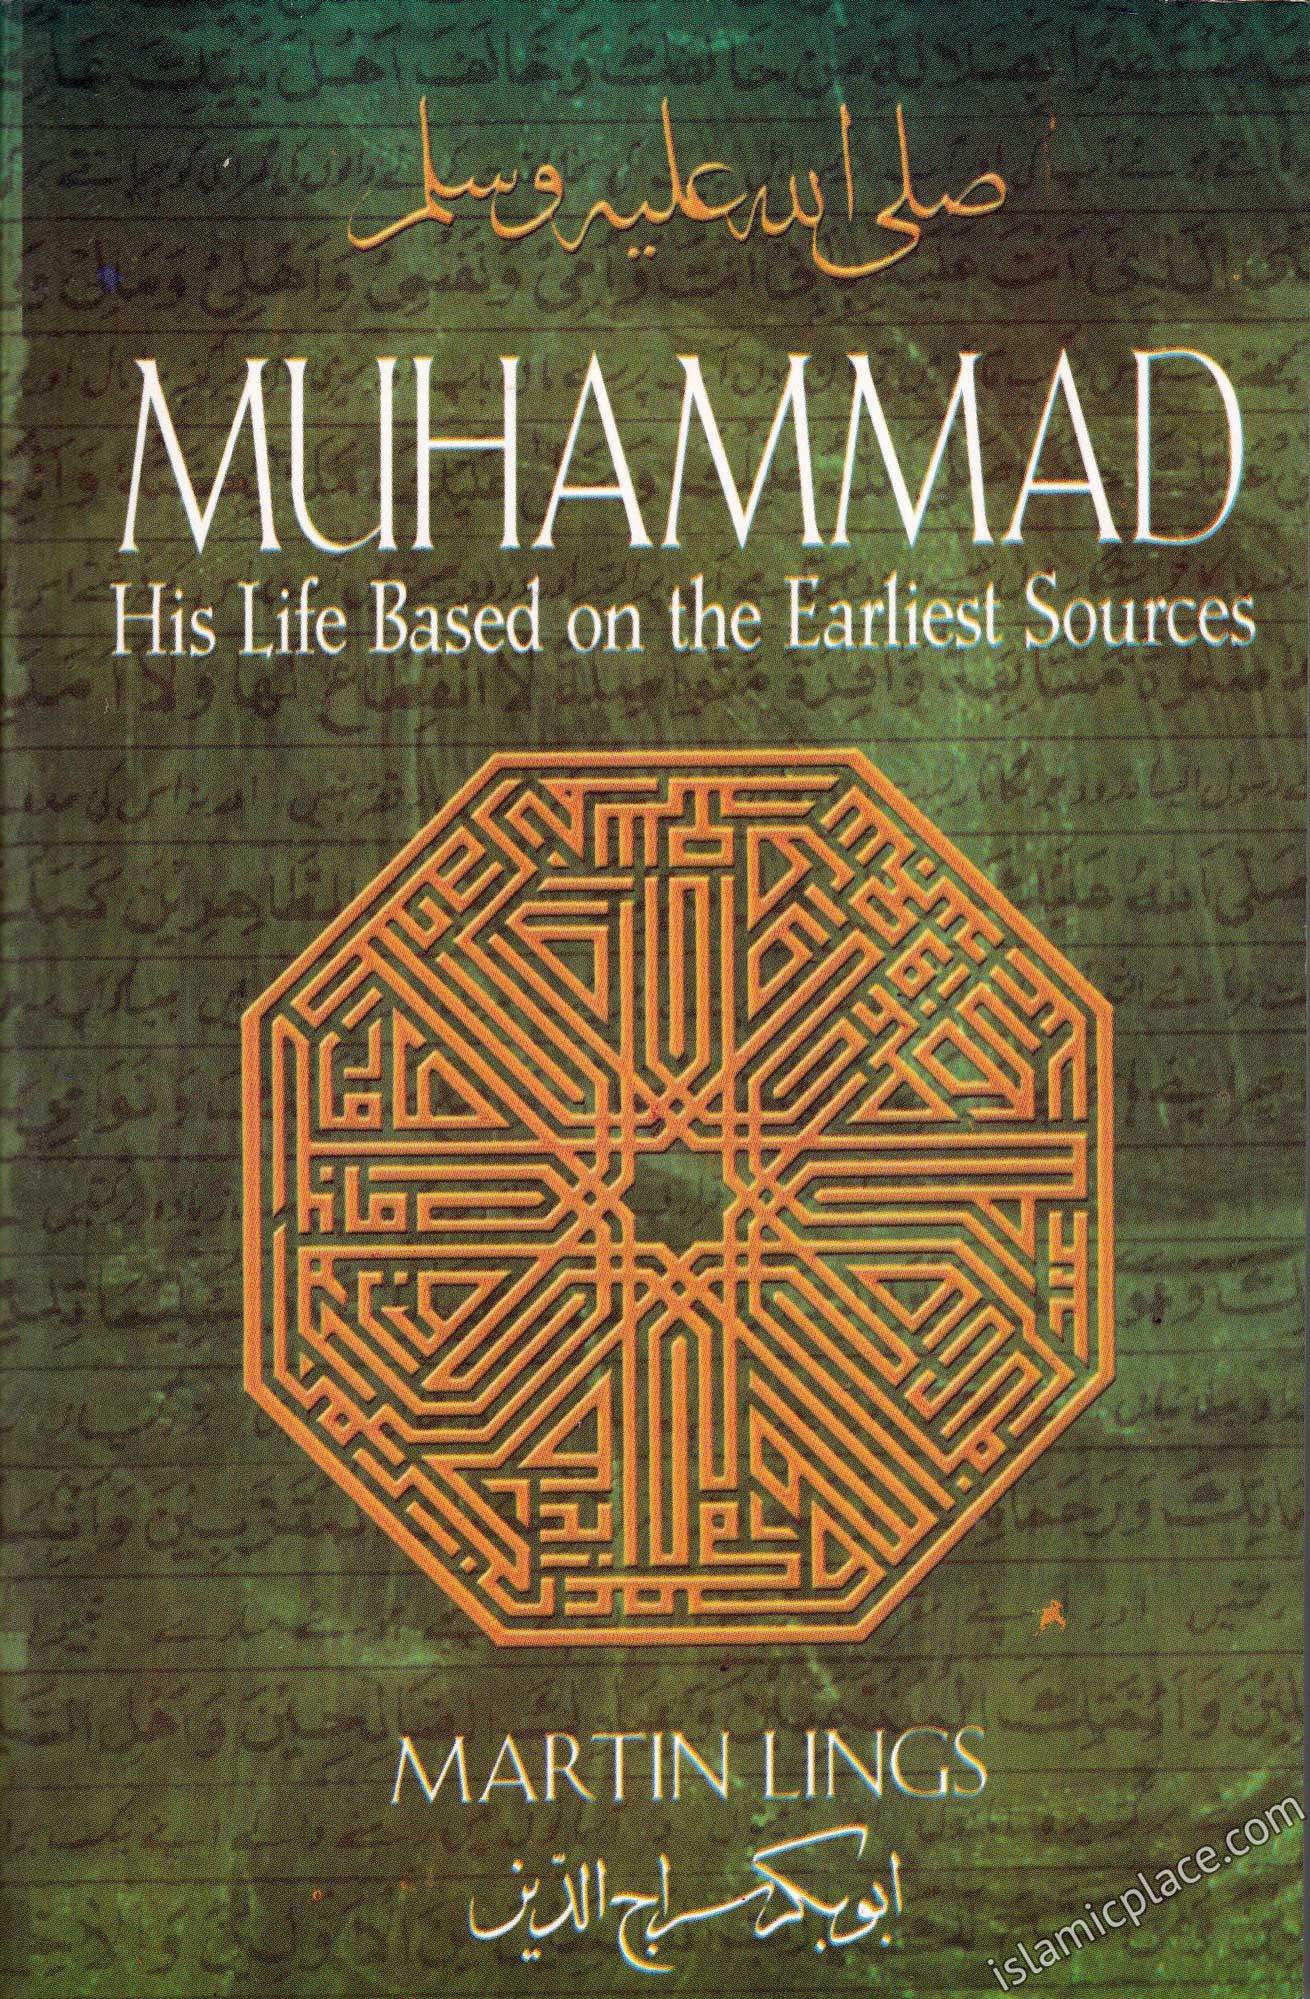 Muhammad his life based on the earliest sources